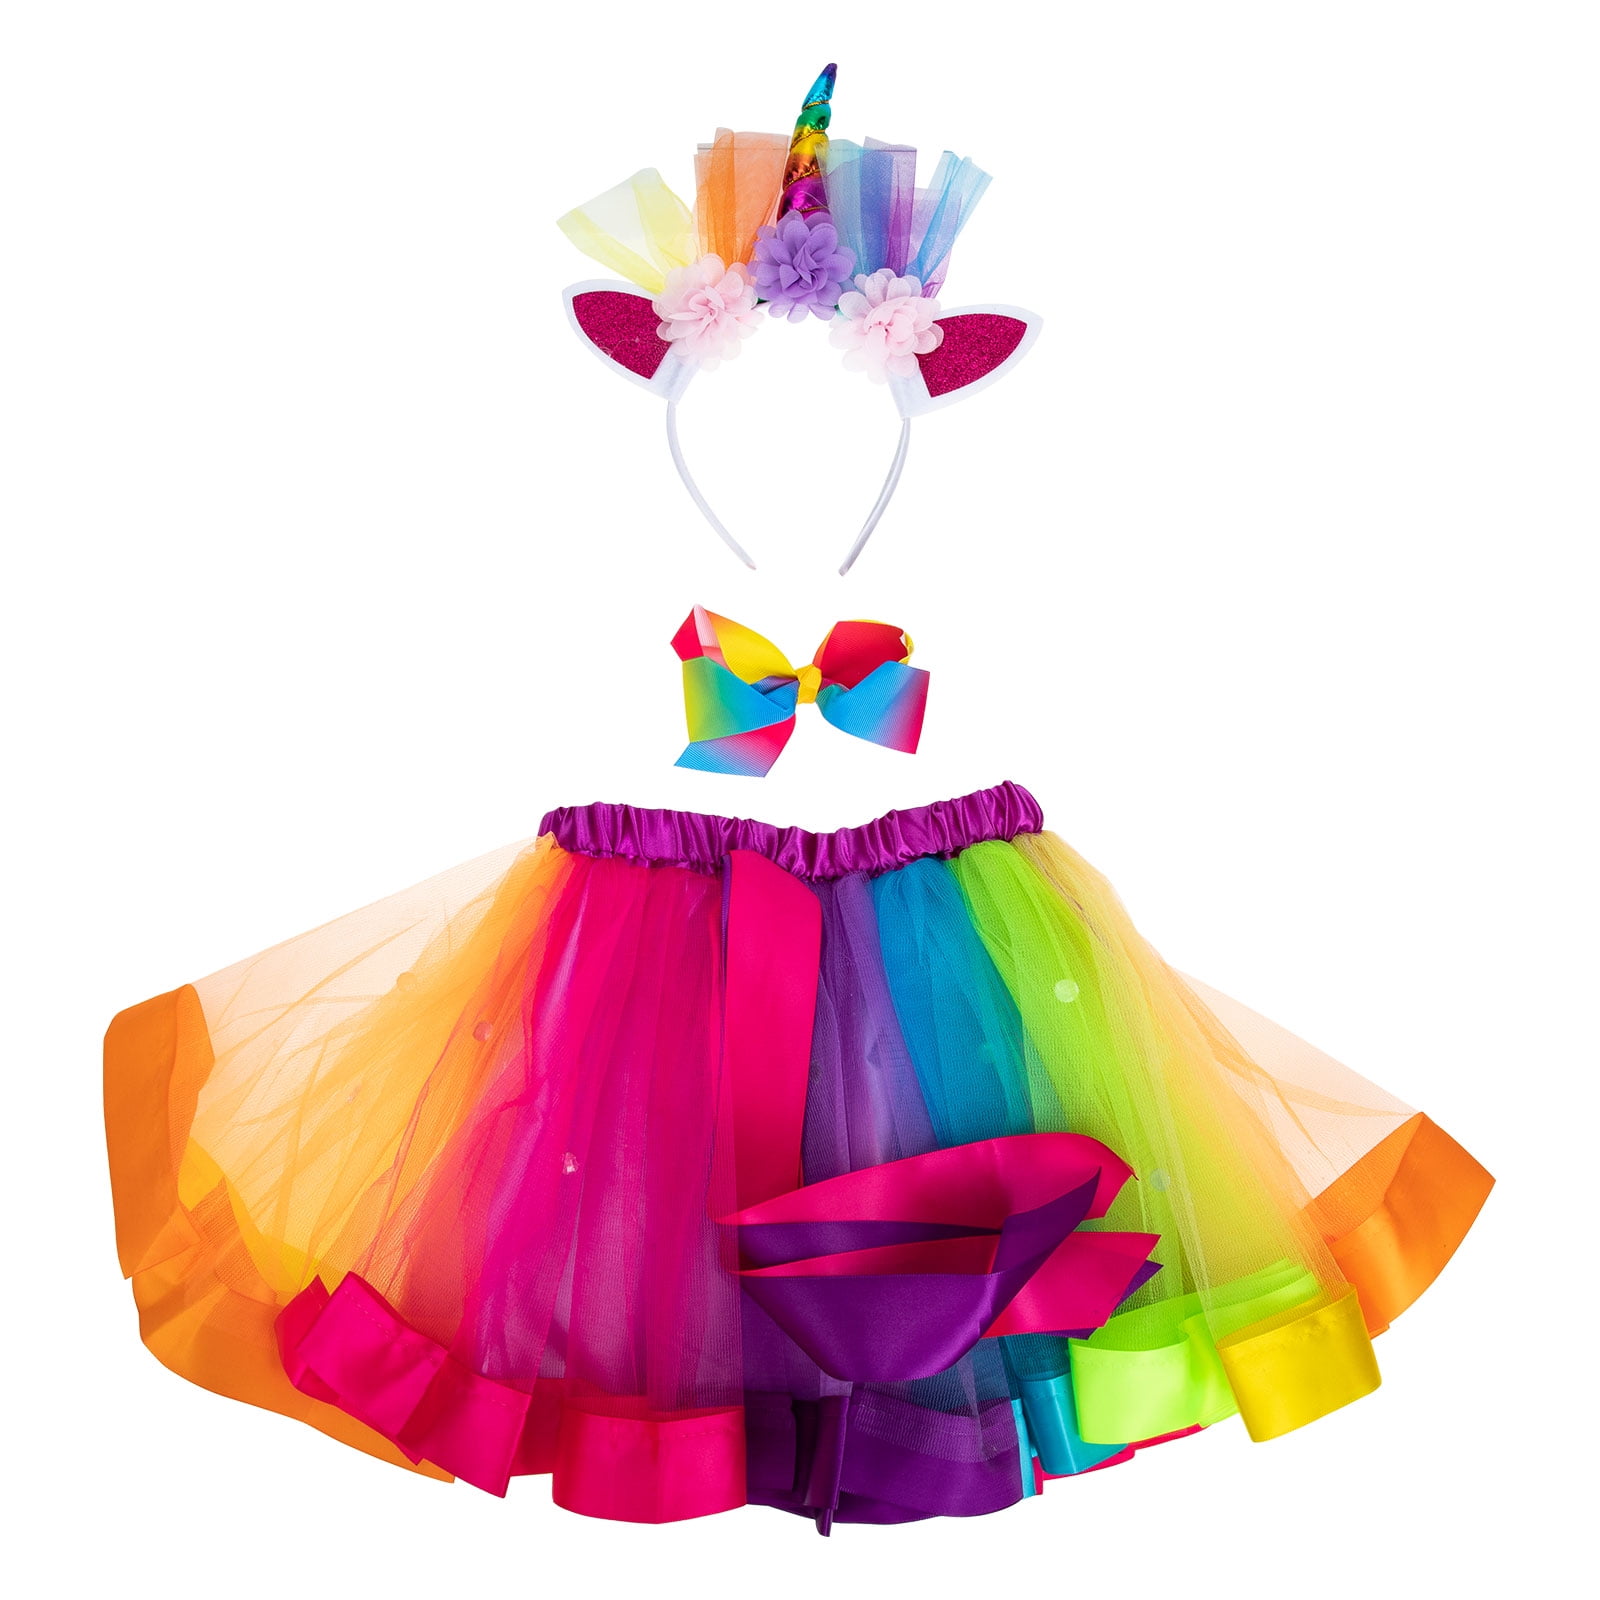 Colorful Rainbow Tulle Skirts For Phootshoot Long Ruffles Tiered